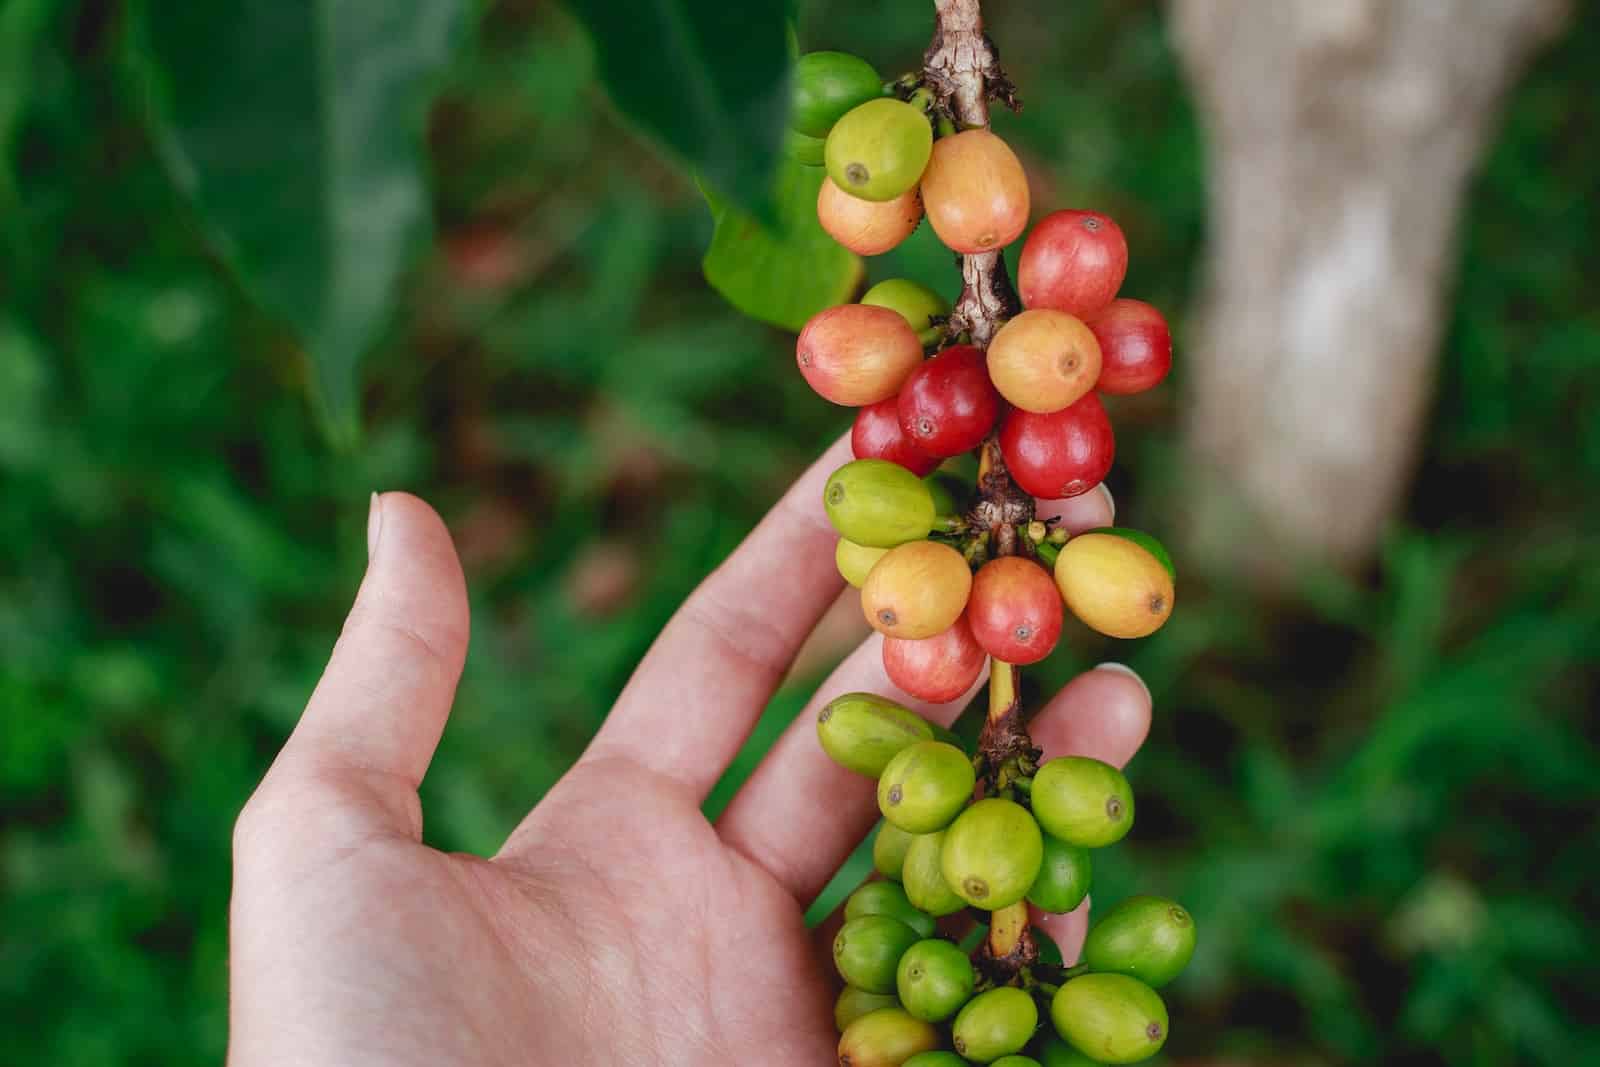 a hand is holding a bunch of berries from Big Island Exploring: Coffee Lovers in Kona on Slow Down, See More from Big Island Exploring: Coffee Lovers in Kona on Slow Down, See More from Big Island Exploring: Coffee Lovers in Kona on Slow Down, See More from Big Island Exploring: Coffee Lovers in Kona on Slow Down, See More from Big Island Exploring: Coffee Lovers in Kona on Slow Down, See More from Big Island Exploring: Coffee Lovers in Kona on Slow Down, See More from Big Island Exploring: Coffee Lovers in Kona on Slow Down, See More from Big Island Exploring: Coffee Lovers in Kona on Slow Down, See More from Big Island Exploring: Kona Coffee Lovers on Slow Down, See More from Big Island Exploring: Kona Coffee Lovers on Slow Down, See More from Big Island Exploring: Kona Coffee Lovers on Slow Down, See More from Big Island Exploring: Kona Coffee Lovers on Slow Down, See More from Big Island Exploring: Kona Coffee Lovers on Slow Down, See More from Big Island Exploring: Kona Coffee Lovers on Slow Down, See More from Big Island Exploring: Kona Coffee Lovers on Slow Down, See More